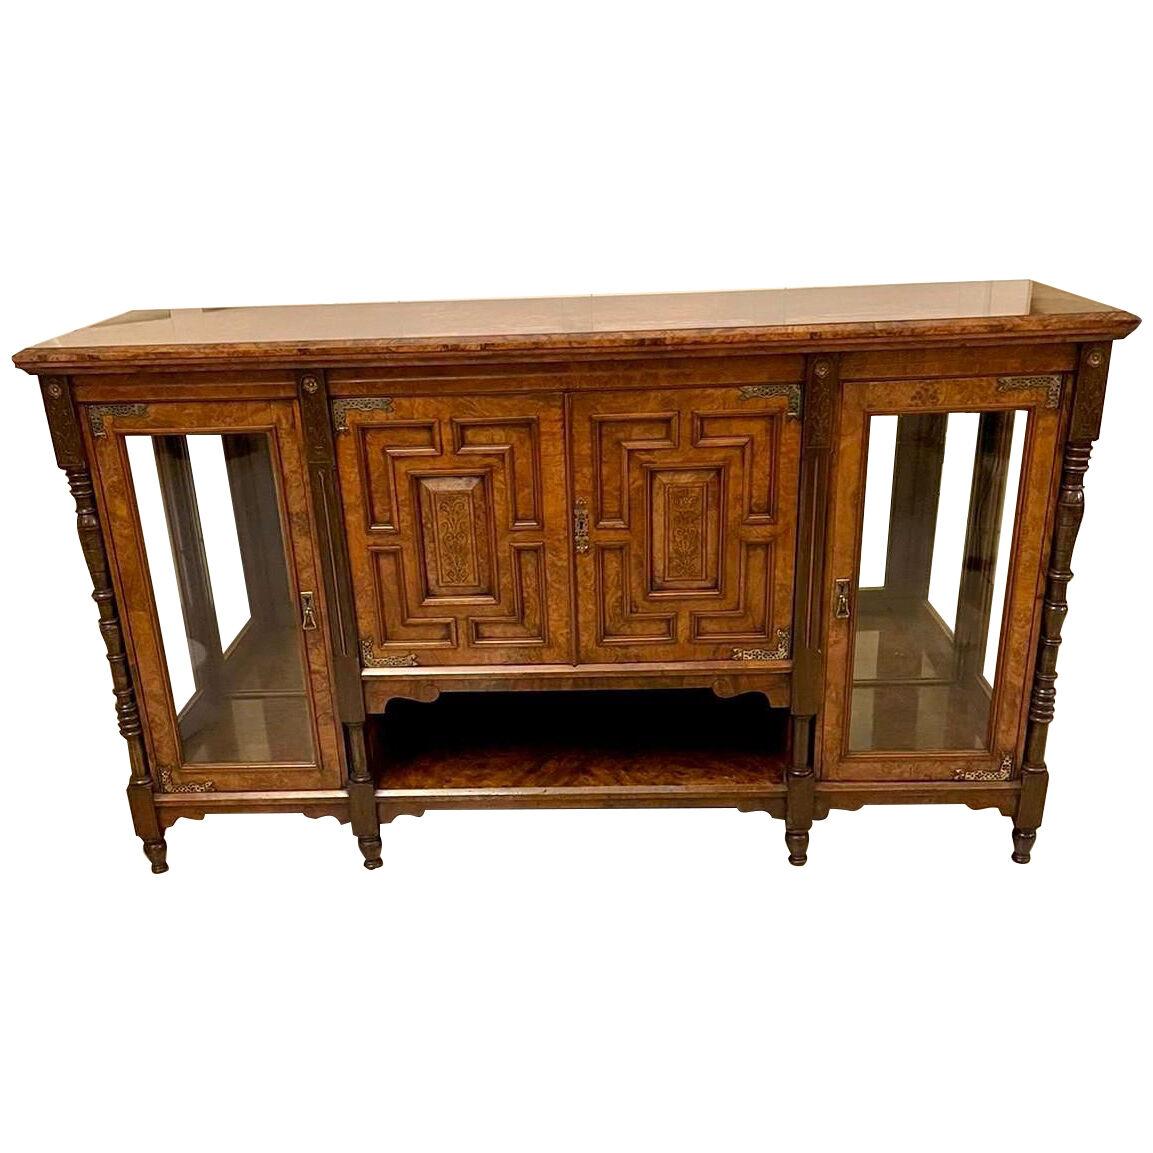 Outstanding Quality Antique Victorian Burr Walnut Credenza